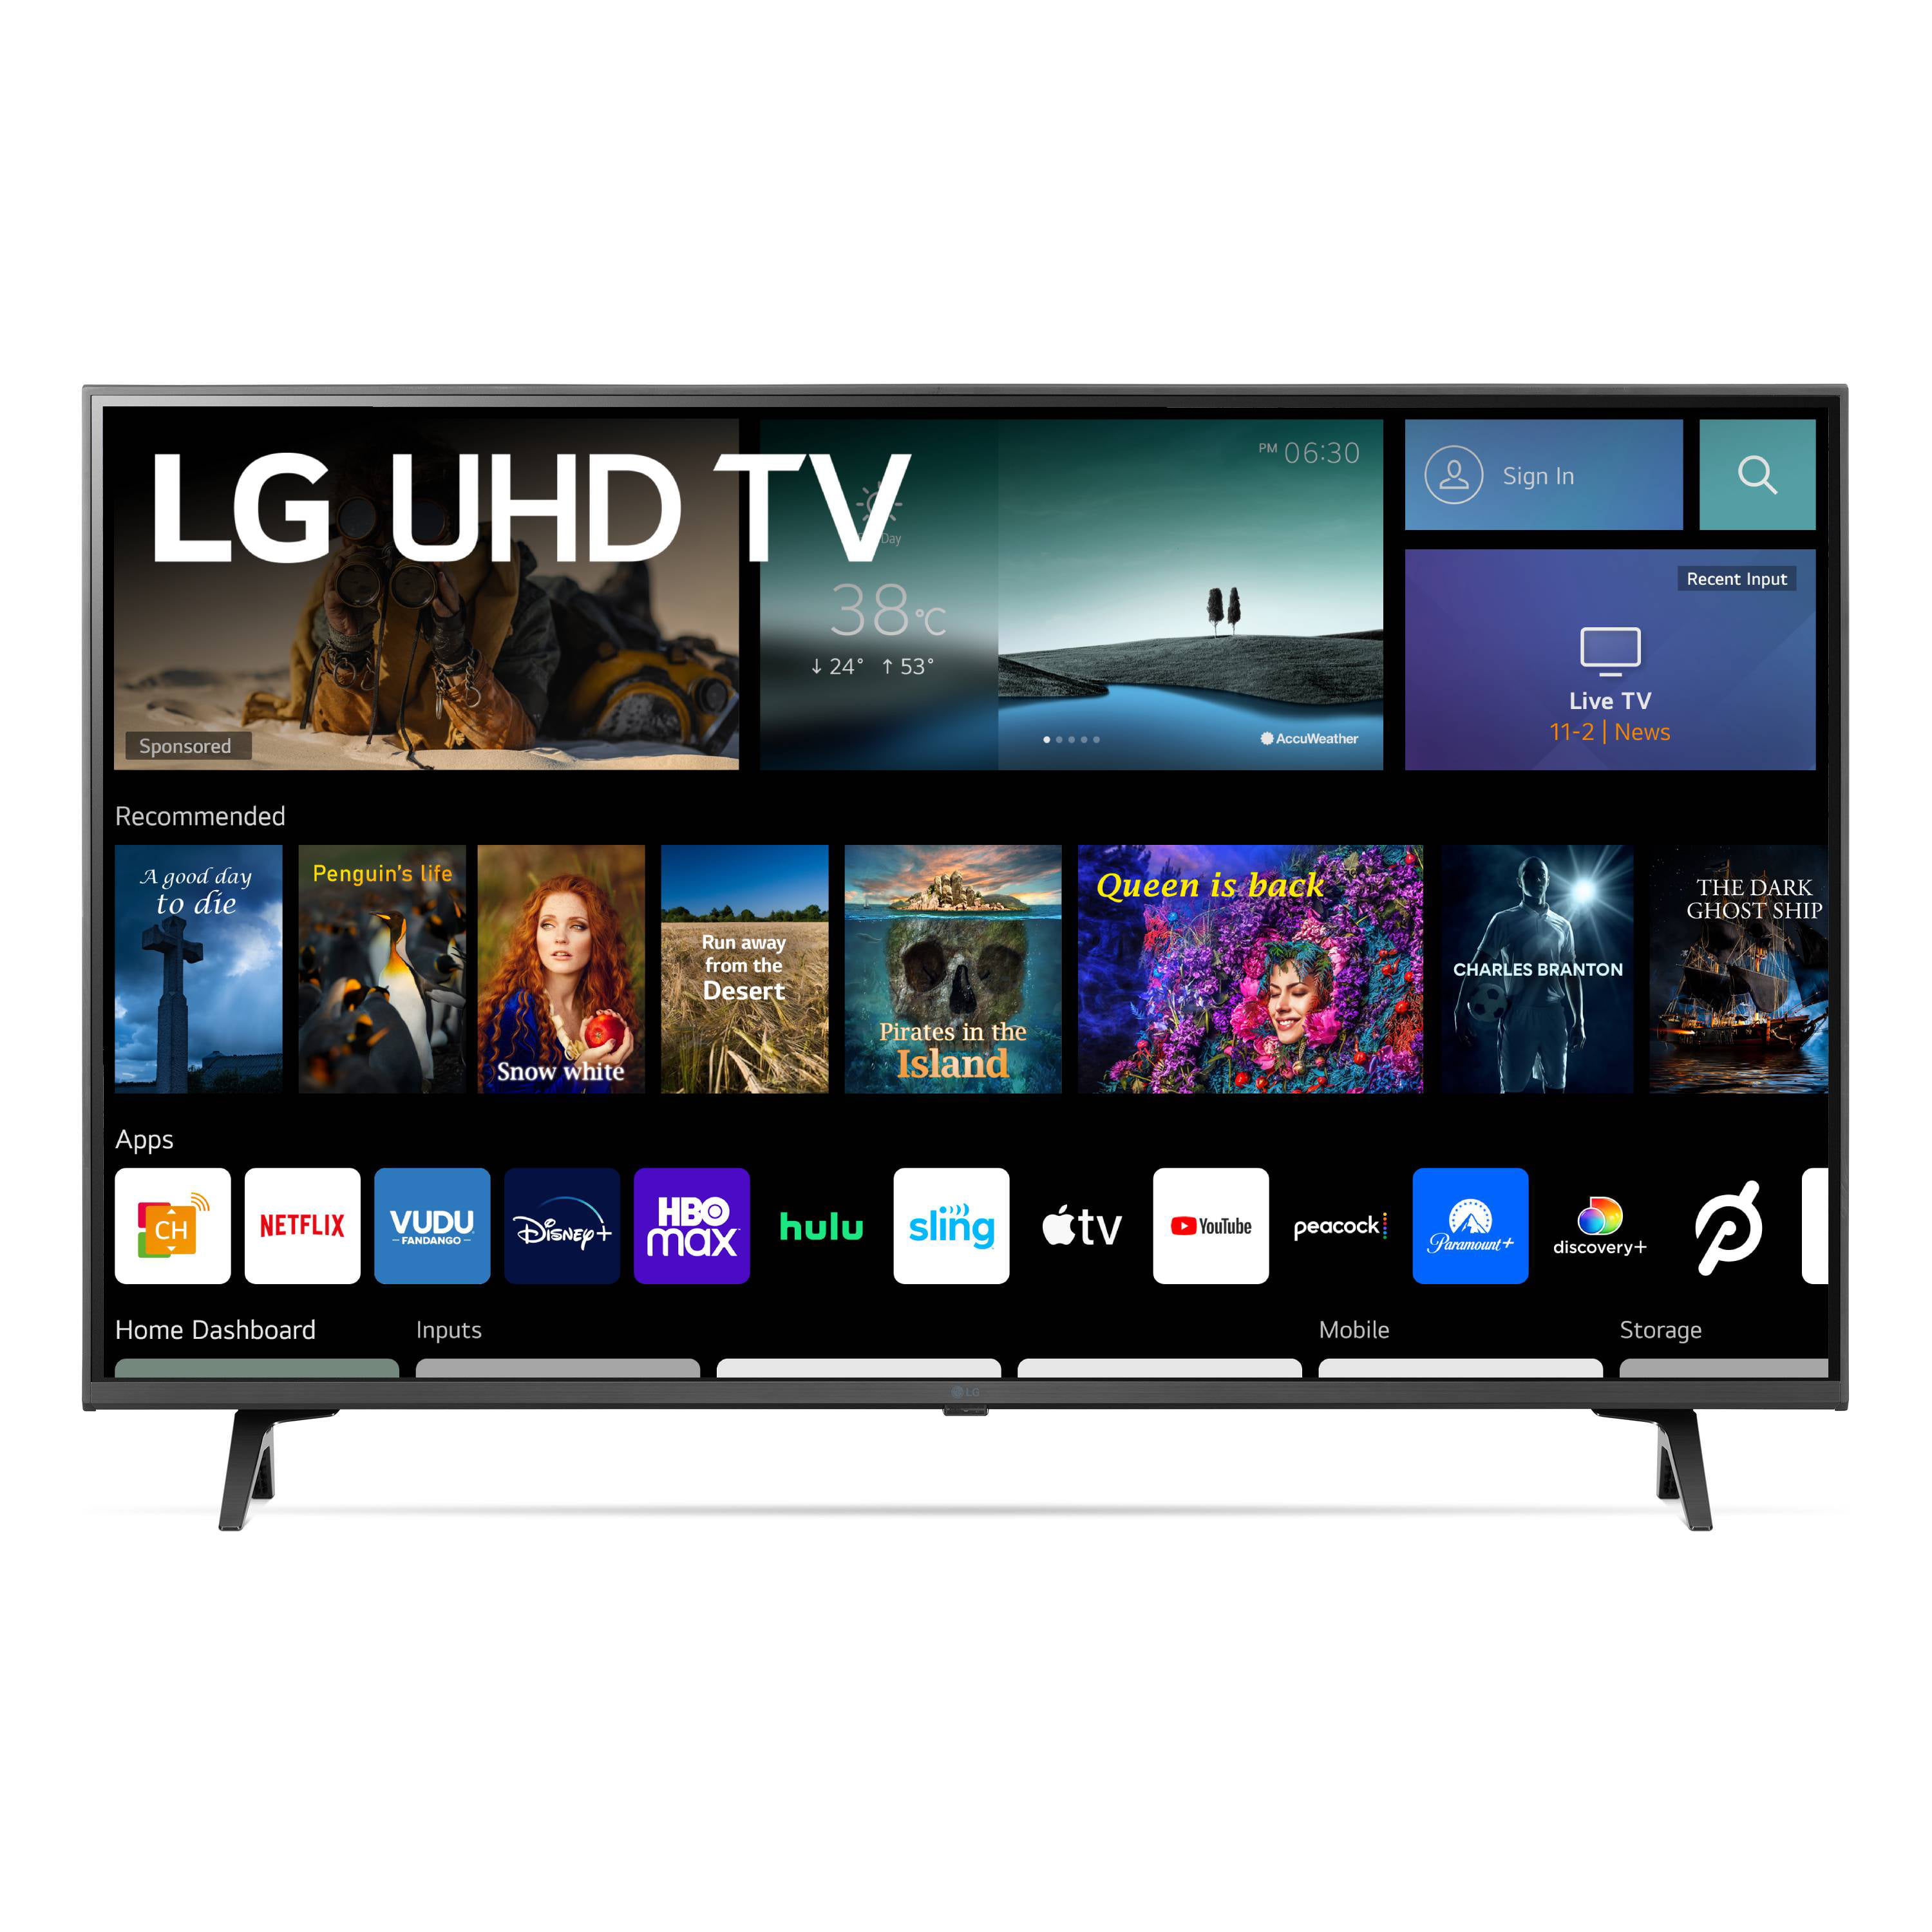 How to Set Up Your LG TV? 13